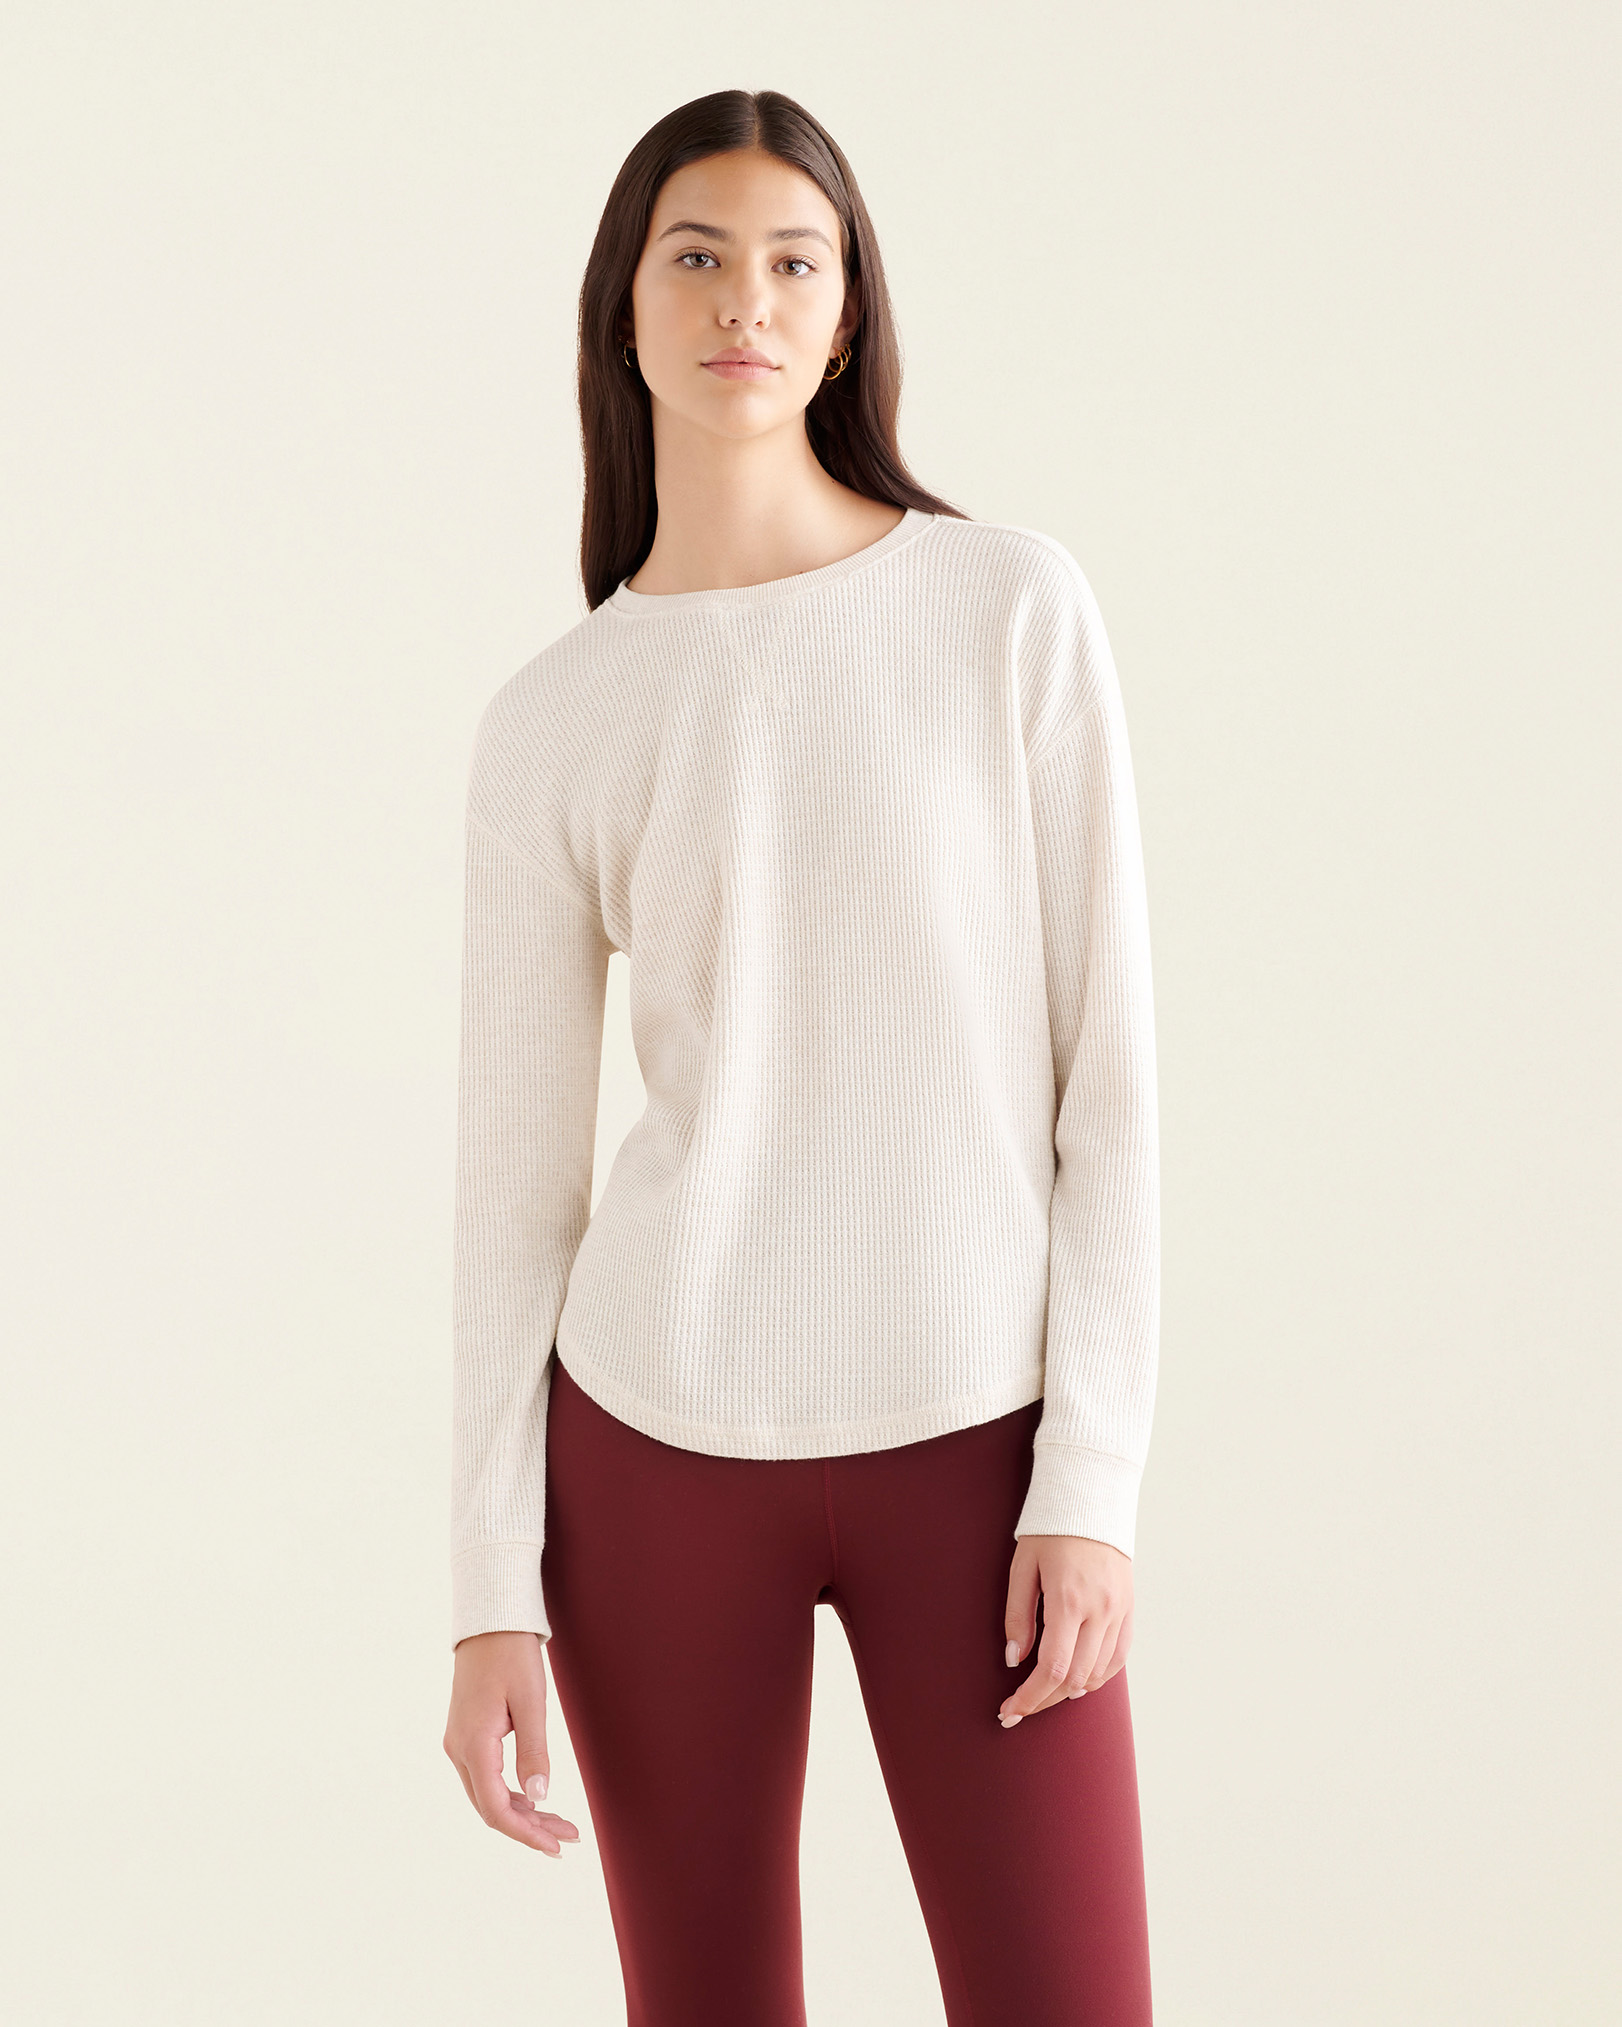 Roots Waffle Long Sleeve Top in Oatmeal Mix